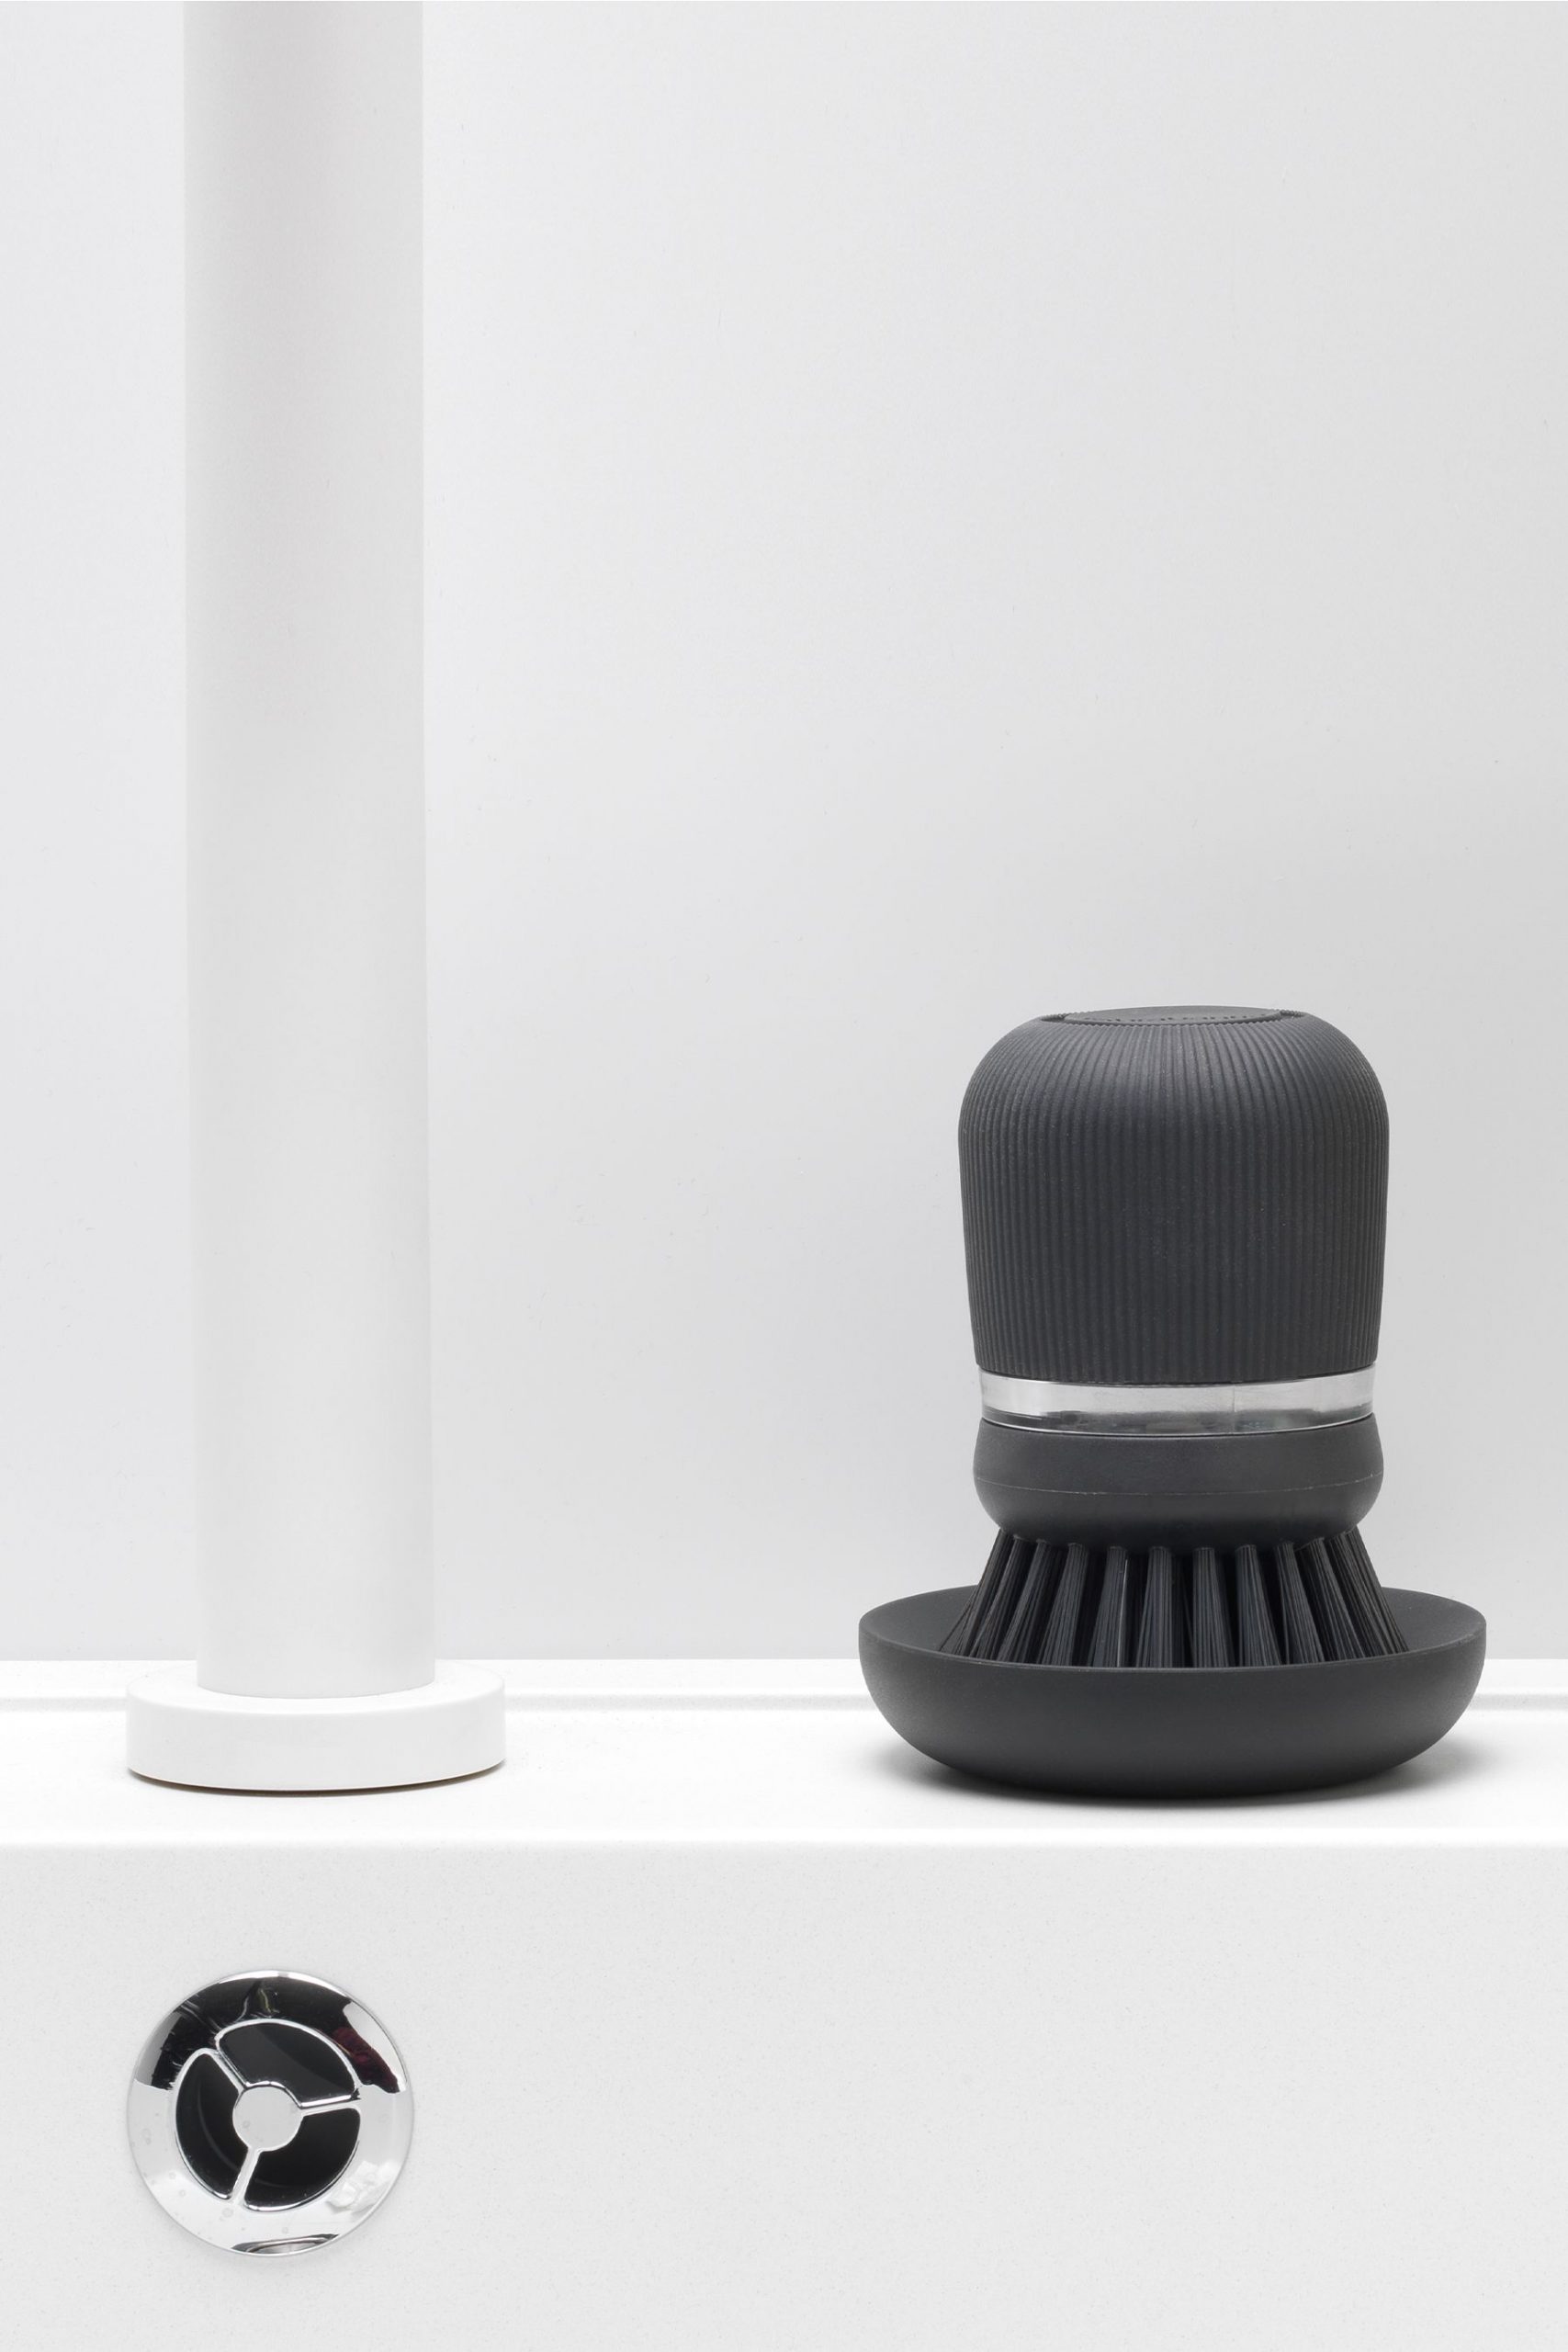 Brabantia Dish Brush with Suction Cup Holder - Interismo Online